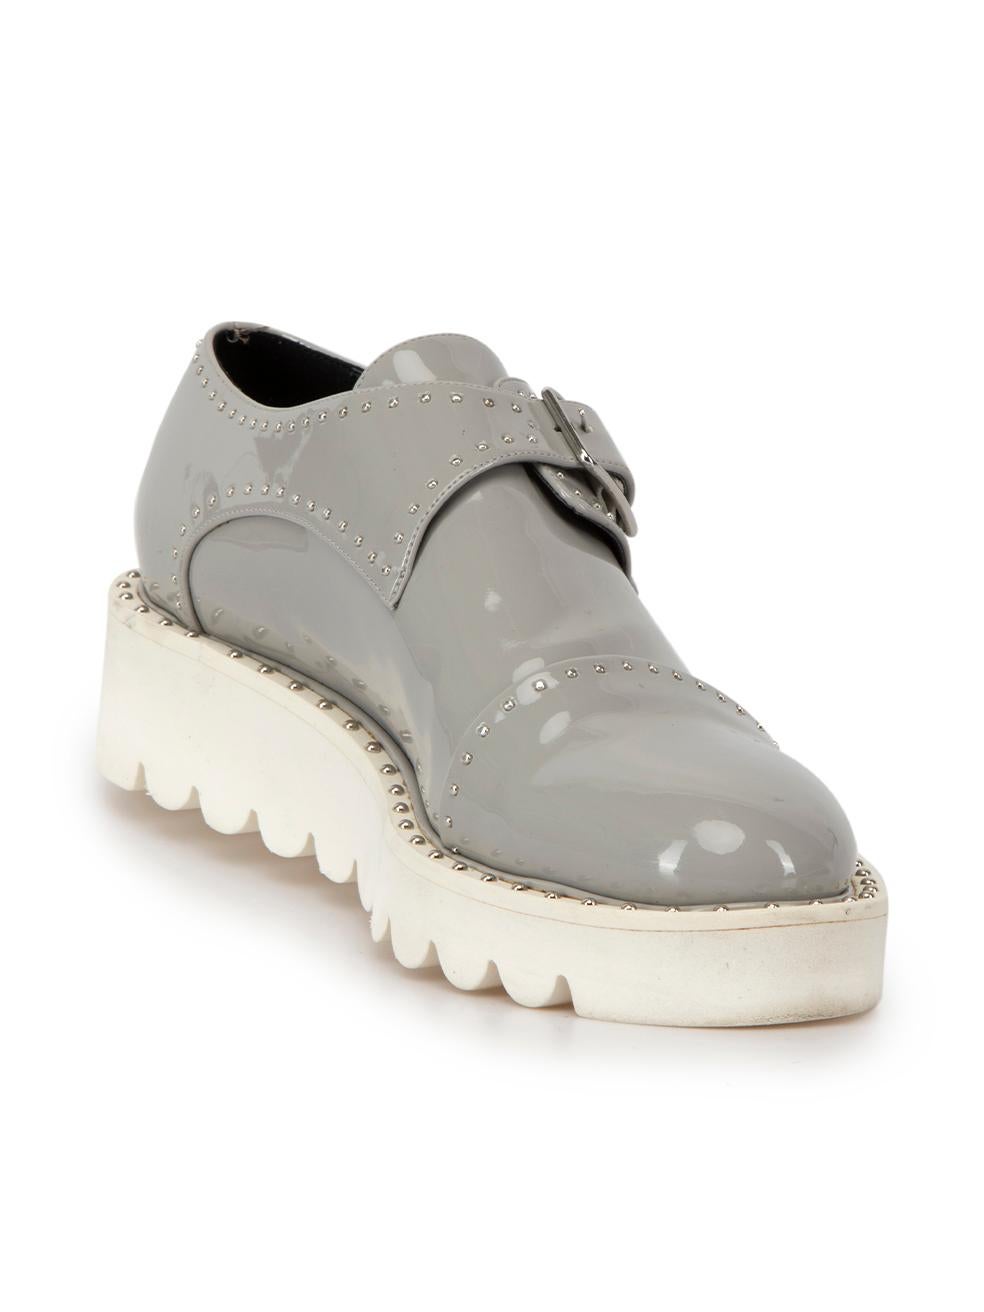 CONDITION is Very good. Minimal wear to shoes is evident. Minimal wear to the soles with scuff marks and discoloured marks by the toe studs on the left shoe on this used Stella McCartney designer resale item.



Details


Grey

Vegan patent